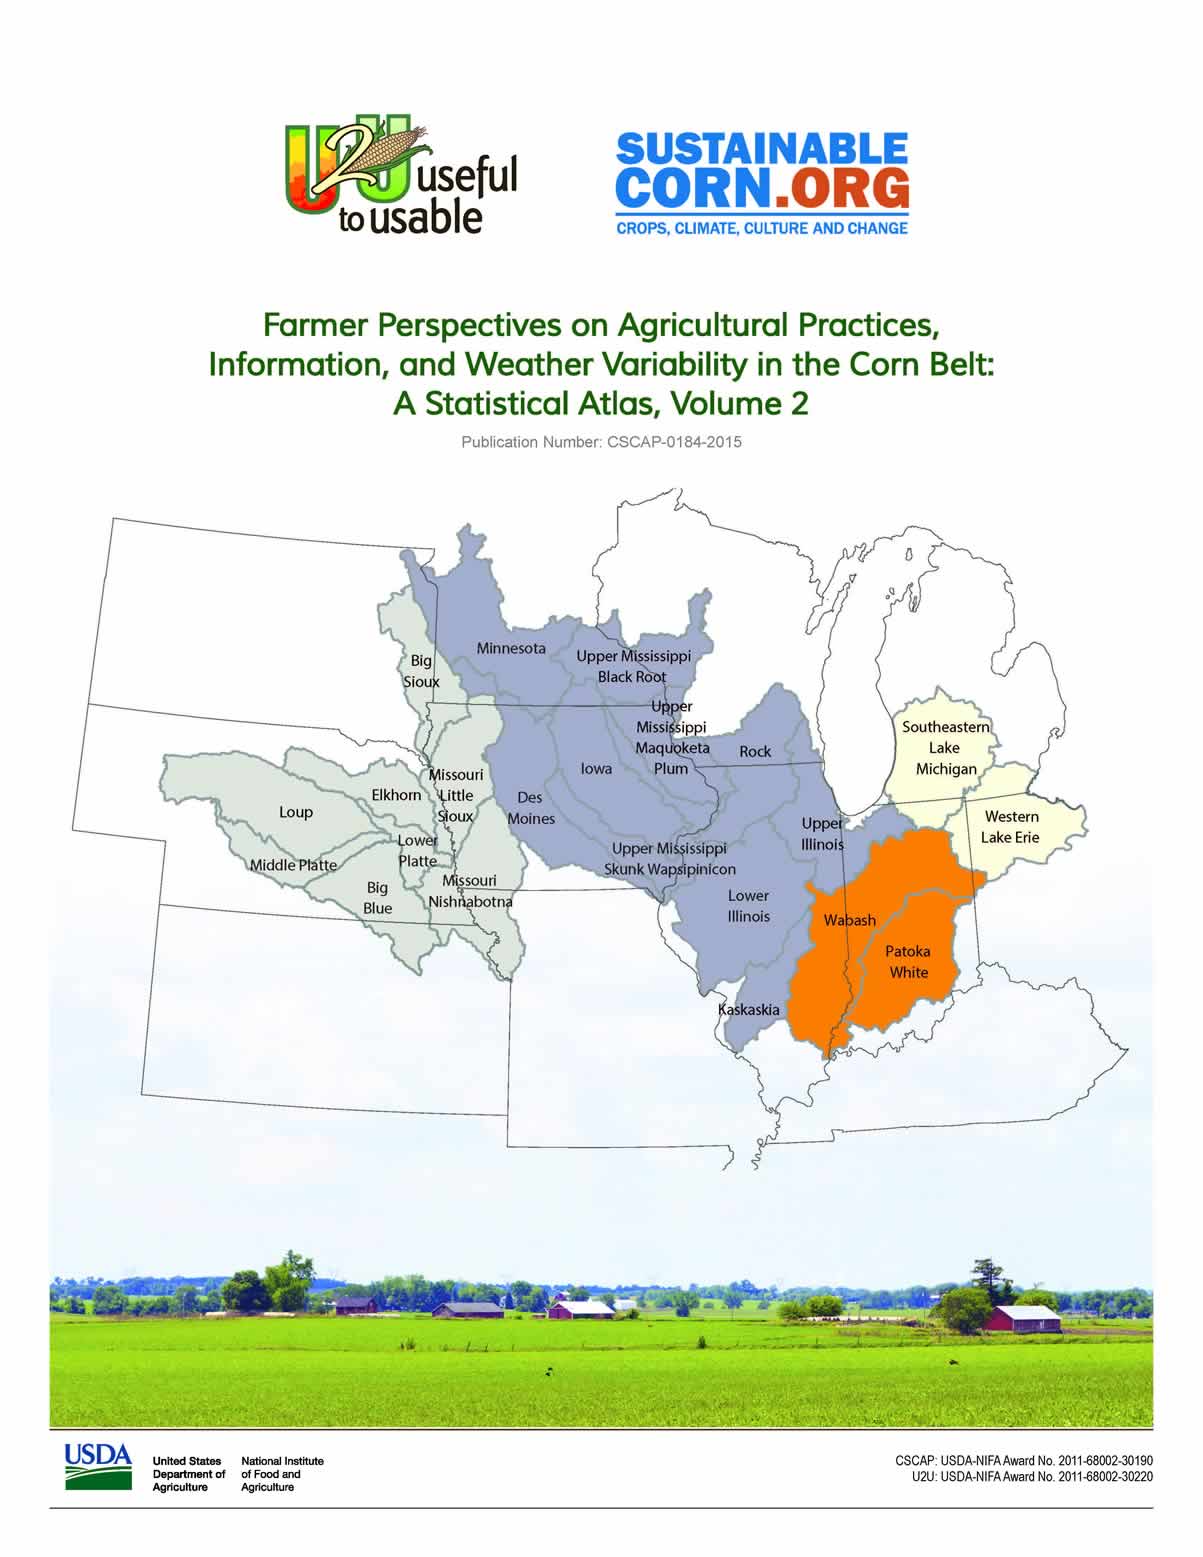 A newly published atlas details beliefs and practices of corn farmers in 22 watersheds in 11 states.